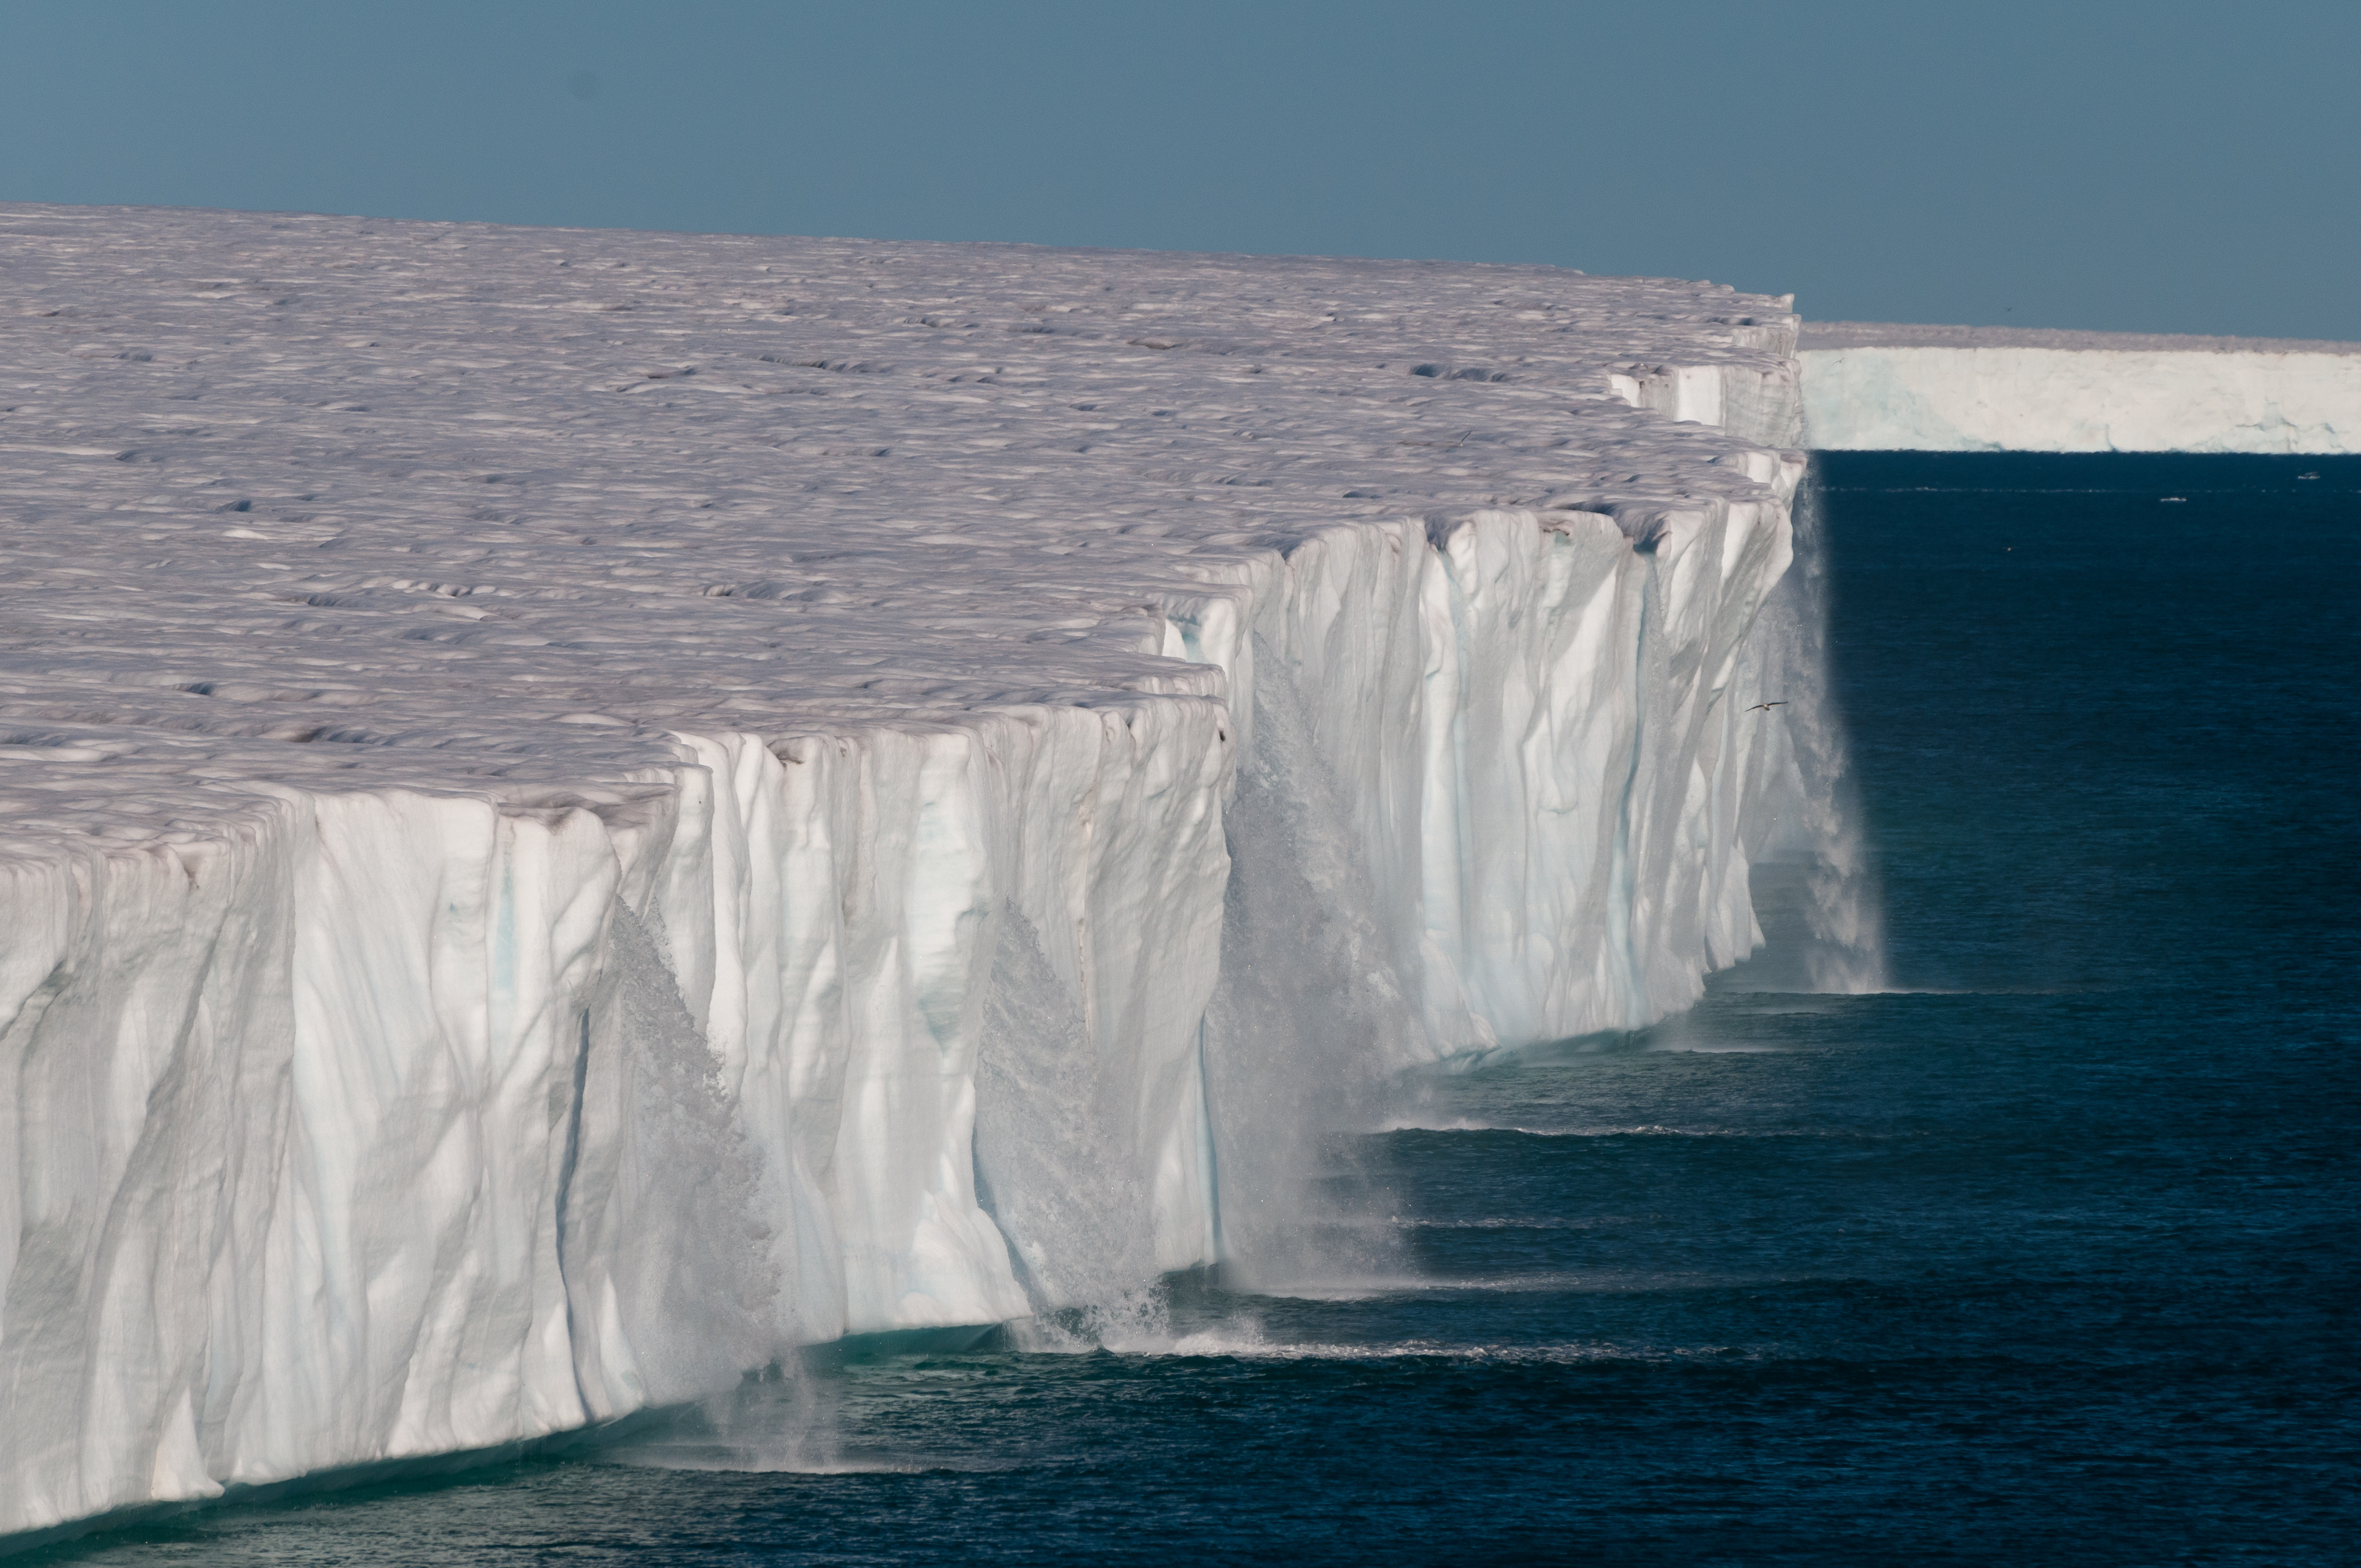 Water running off the arctic ice shelf, climate doom loop could happen if shelf collapses